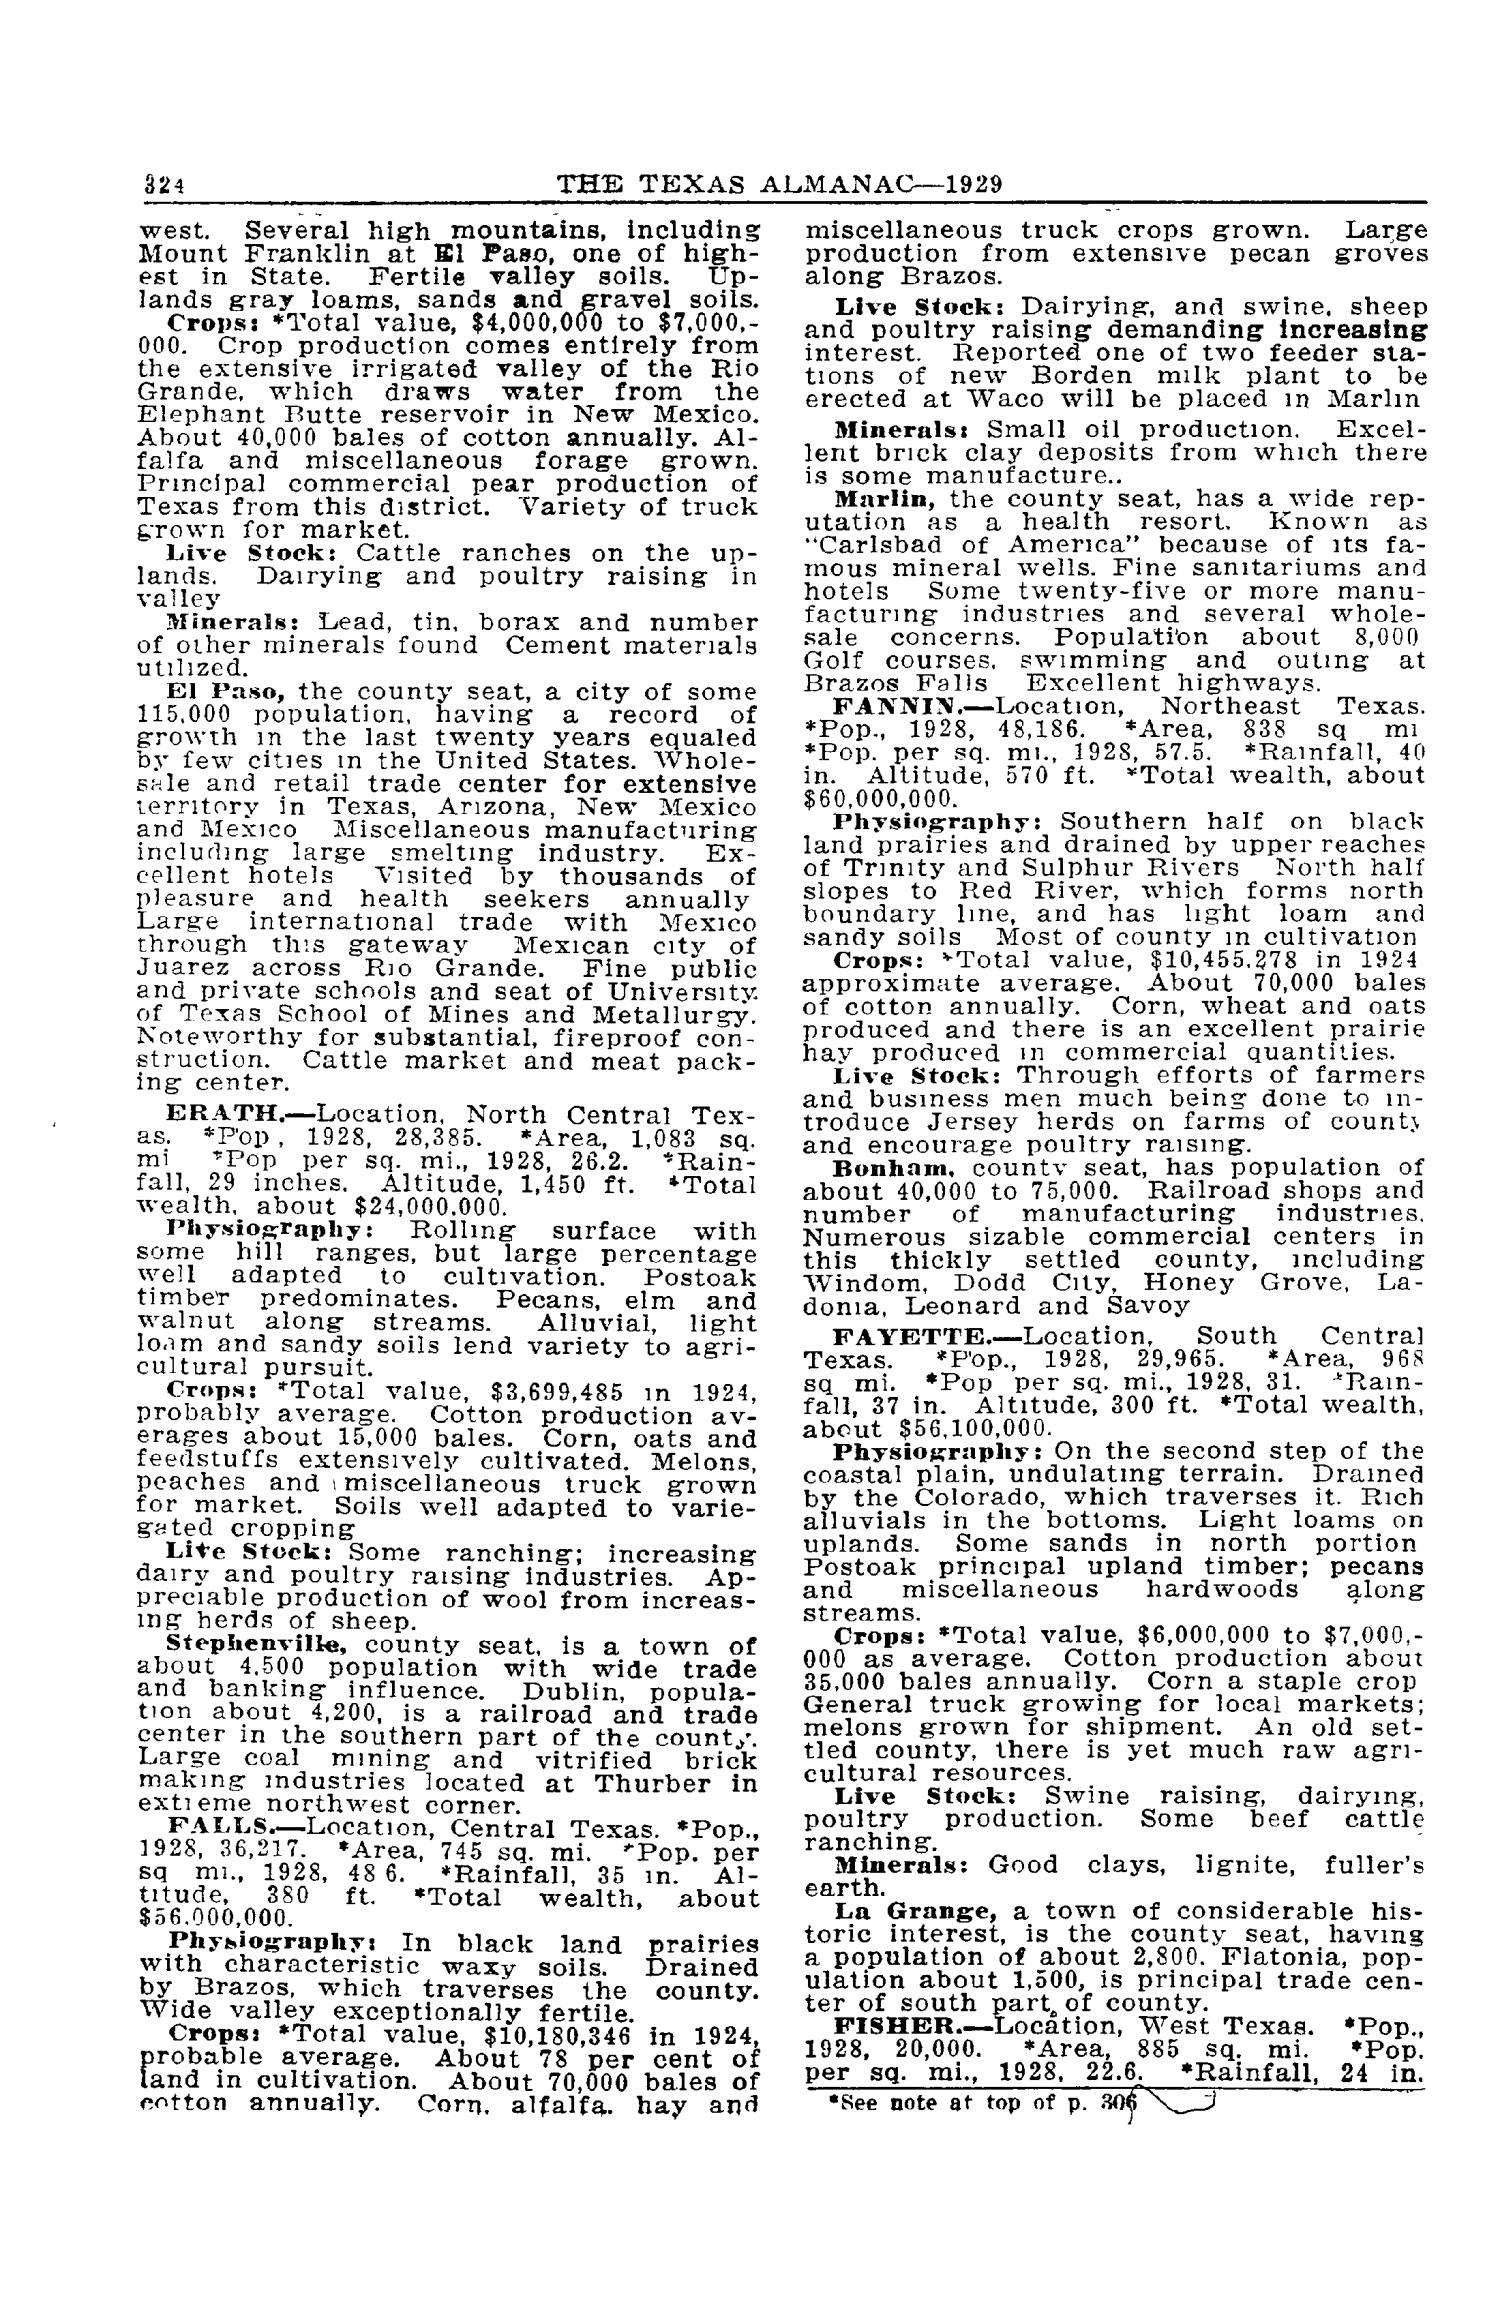 The Texas Almanac and State Industrial Guide 1929 - Page 324 - The